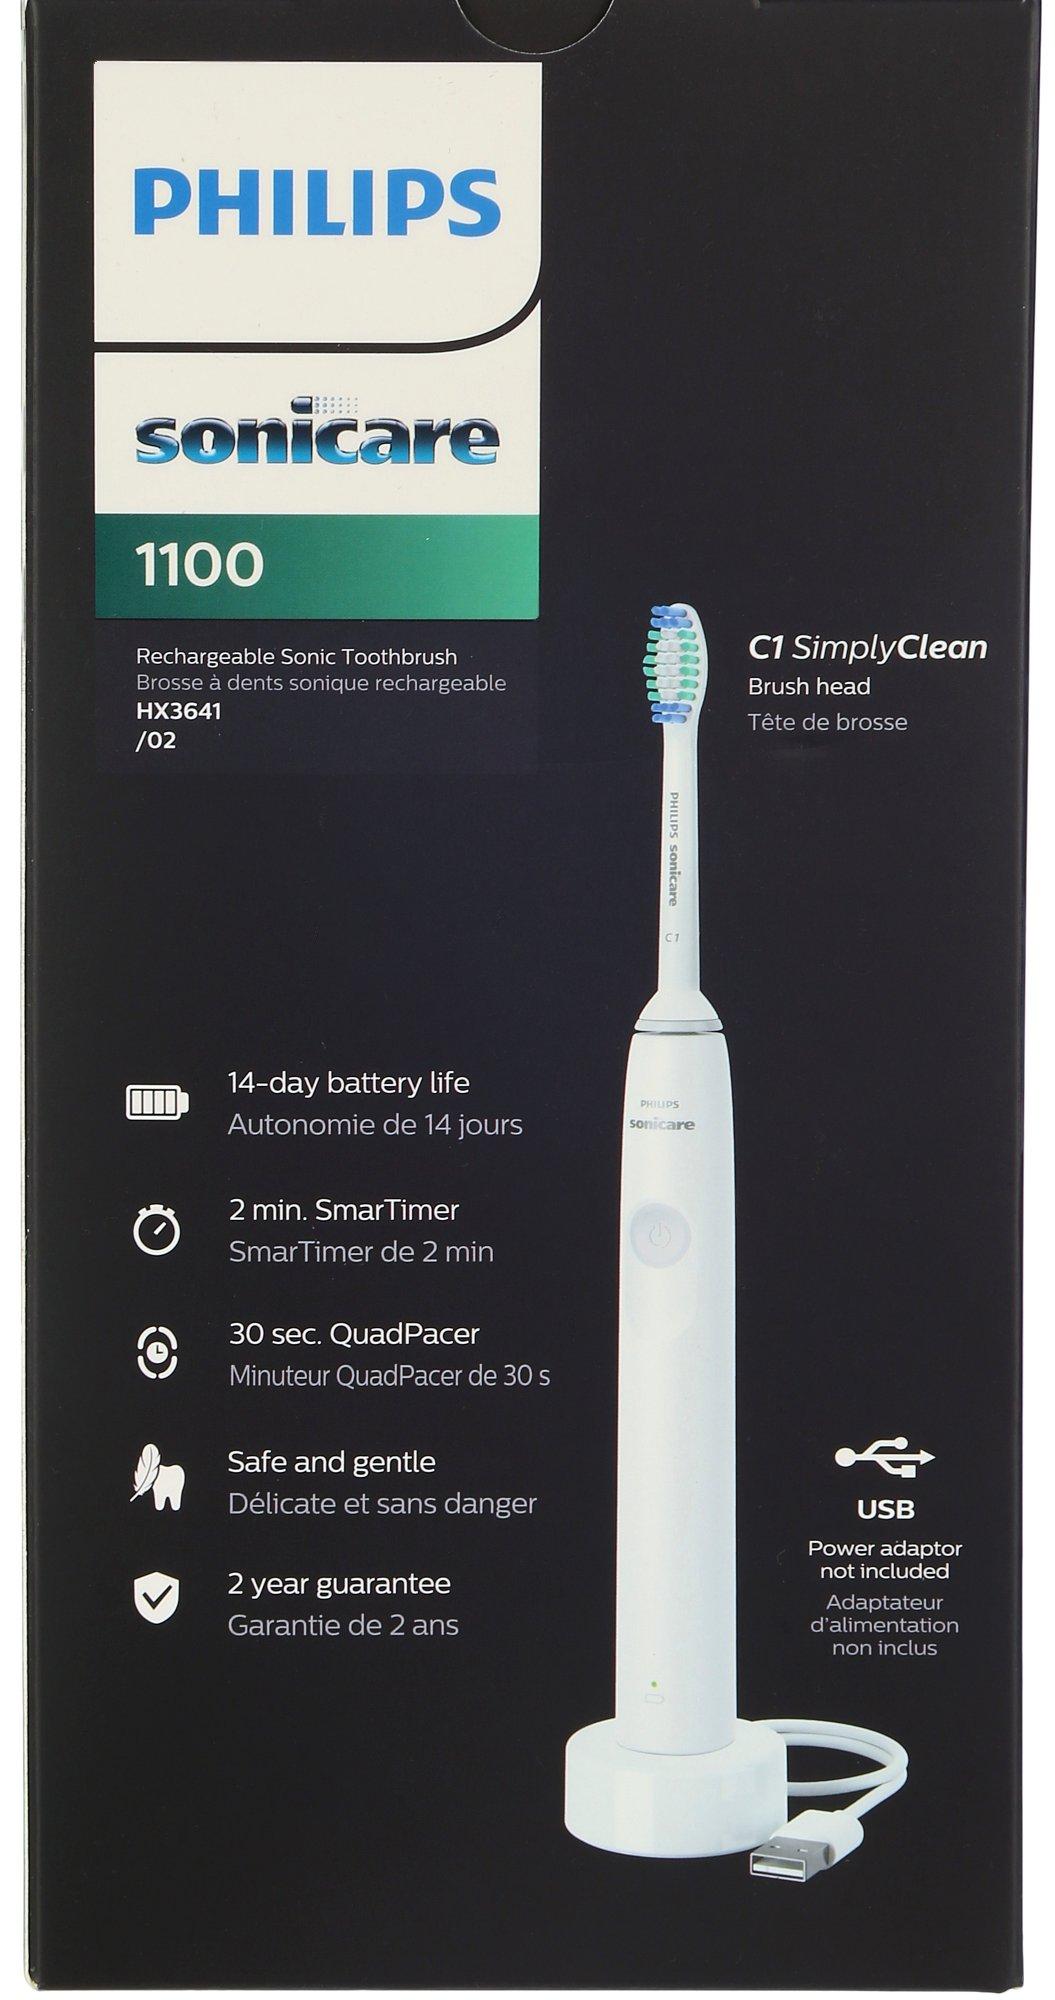 Sonicare 1100 Rechargeable Power Toothbrush